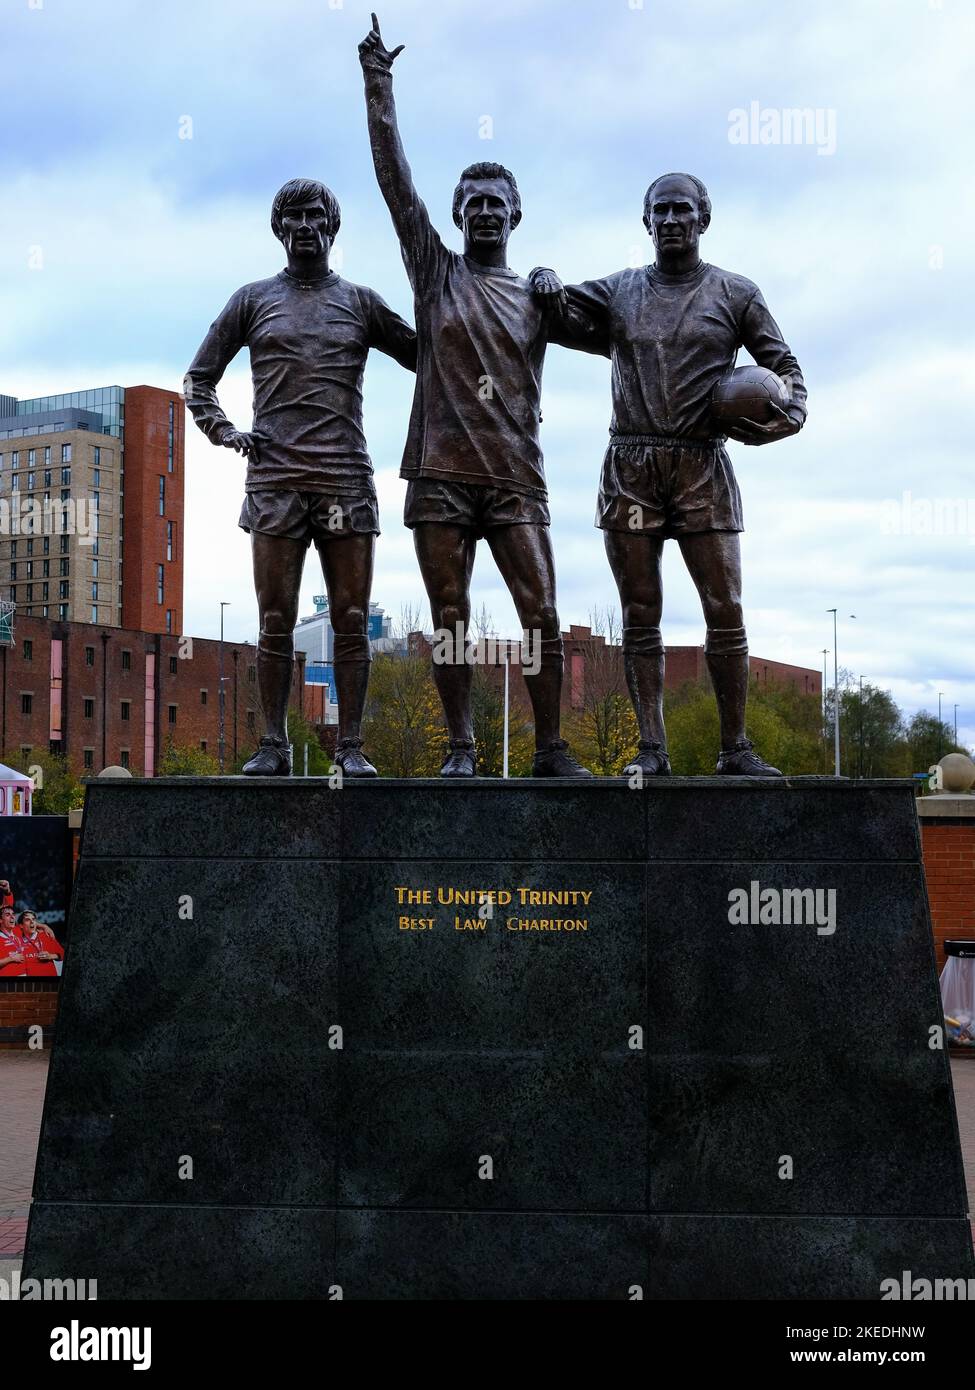 United Trinity Statue in front of Manchester United Football Club Stadium, Old Trafford, Manchester, Greater Manchester, England, UK. Stock Photo